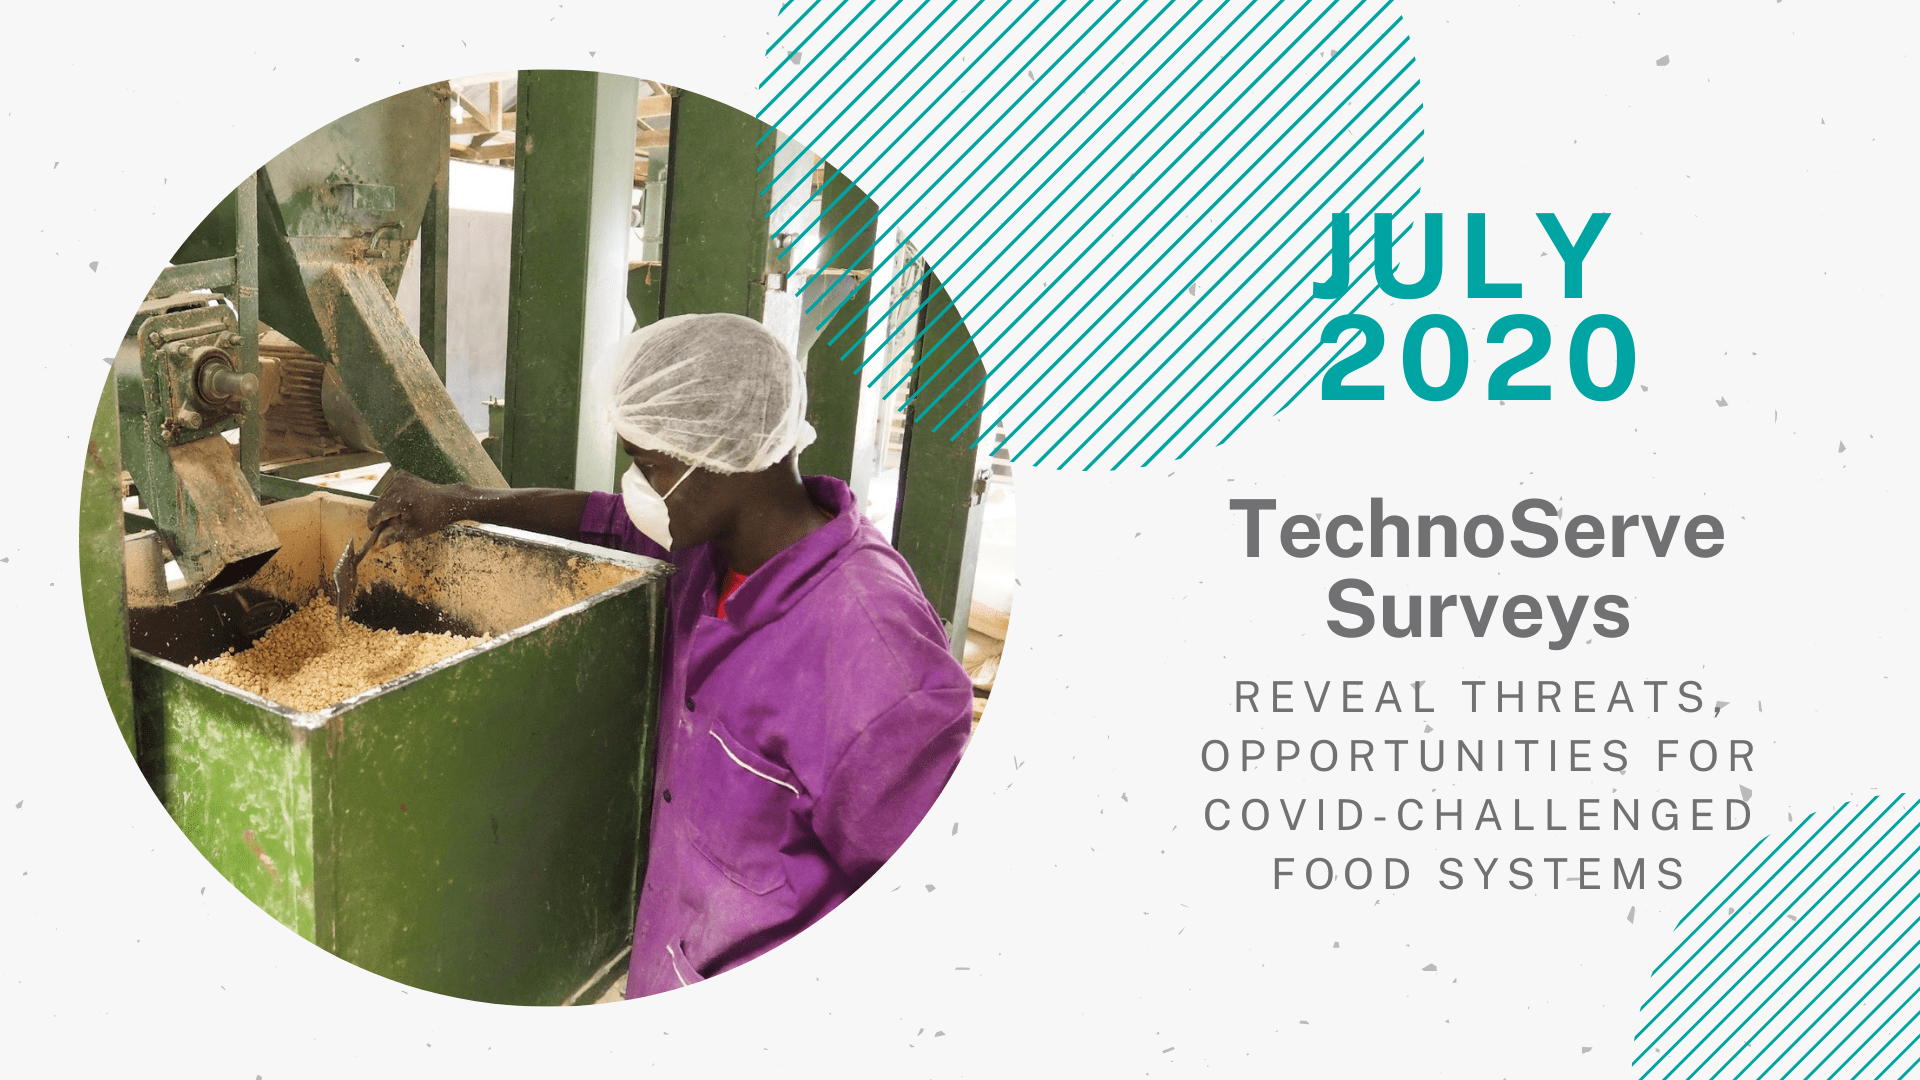 Image for the “July” achievement featured in TechnoServe’s Year in Review 2020 blog. A circular picture on the left side, a woman wearing a PPE mask for COVID-19 protection, a hair net, and a purple shirt is working at a cashew processing facility. The right half of the graphic reads “July 2020: TechnoServe Surveys Reveal Threats, Opportunities for COVID-Challenged Food Systems.”